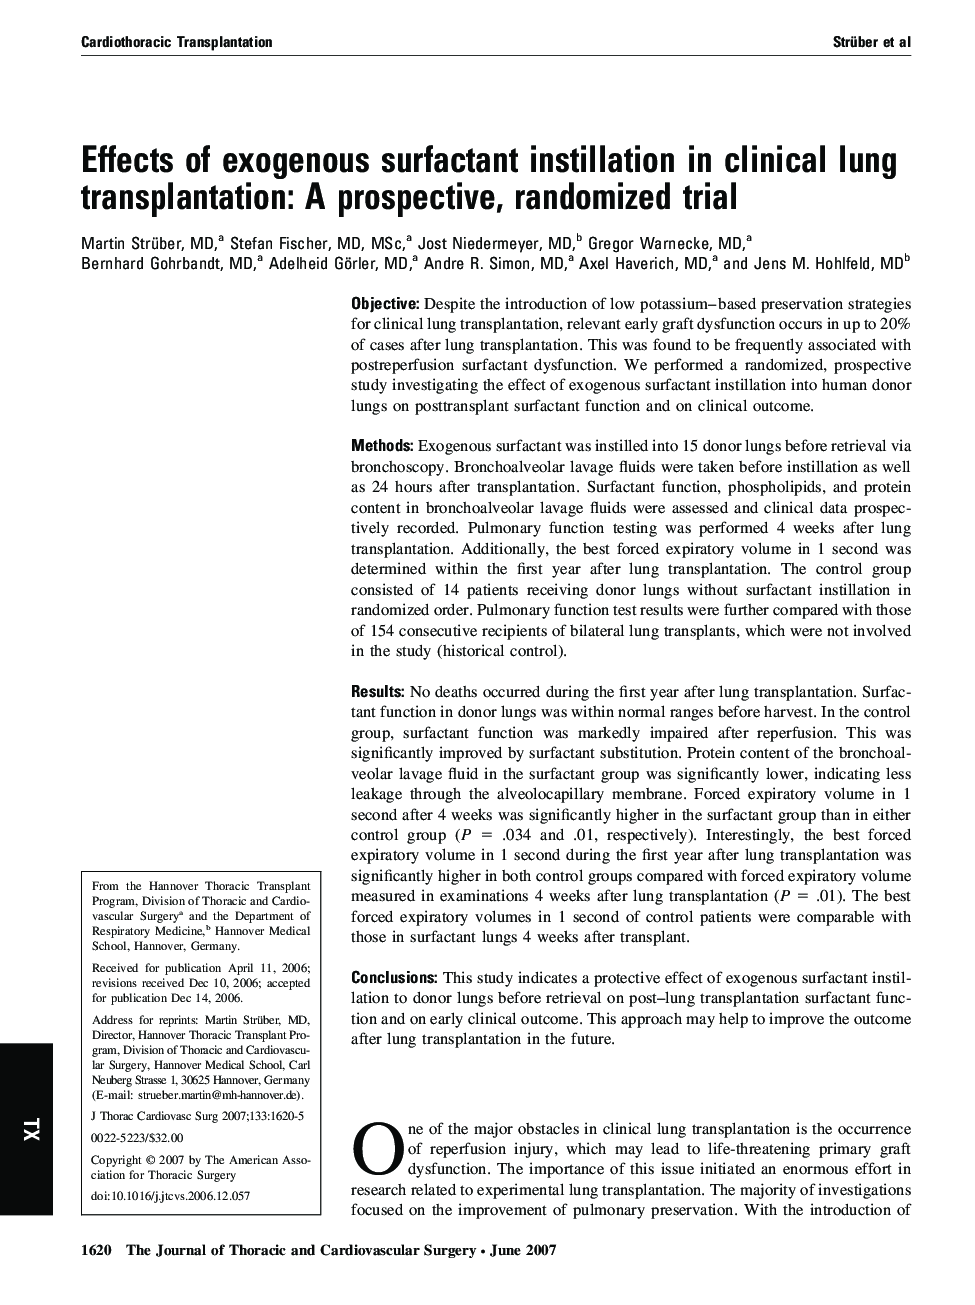 Effects of exogenous surfactant instillation in clinical lung transplantation: A prospective, randomized trial